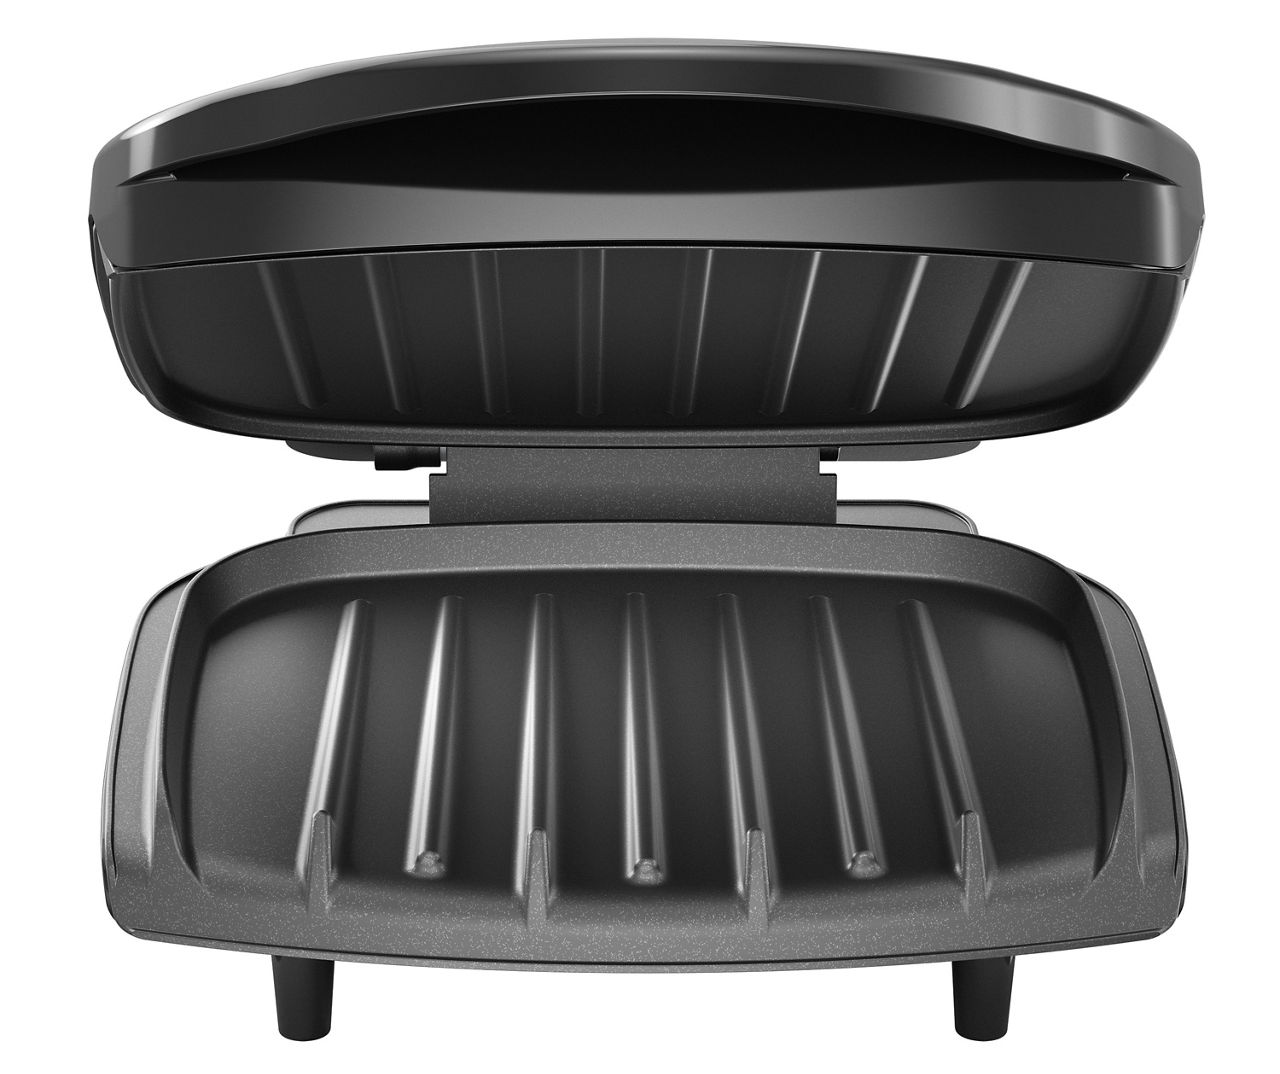 Black and Decker 2 Serving Grill GR9040B